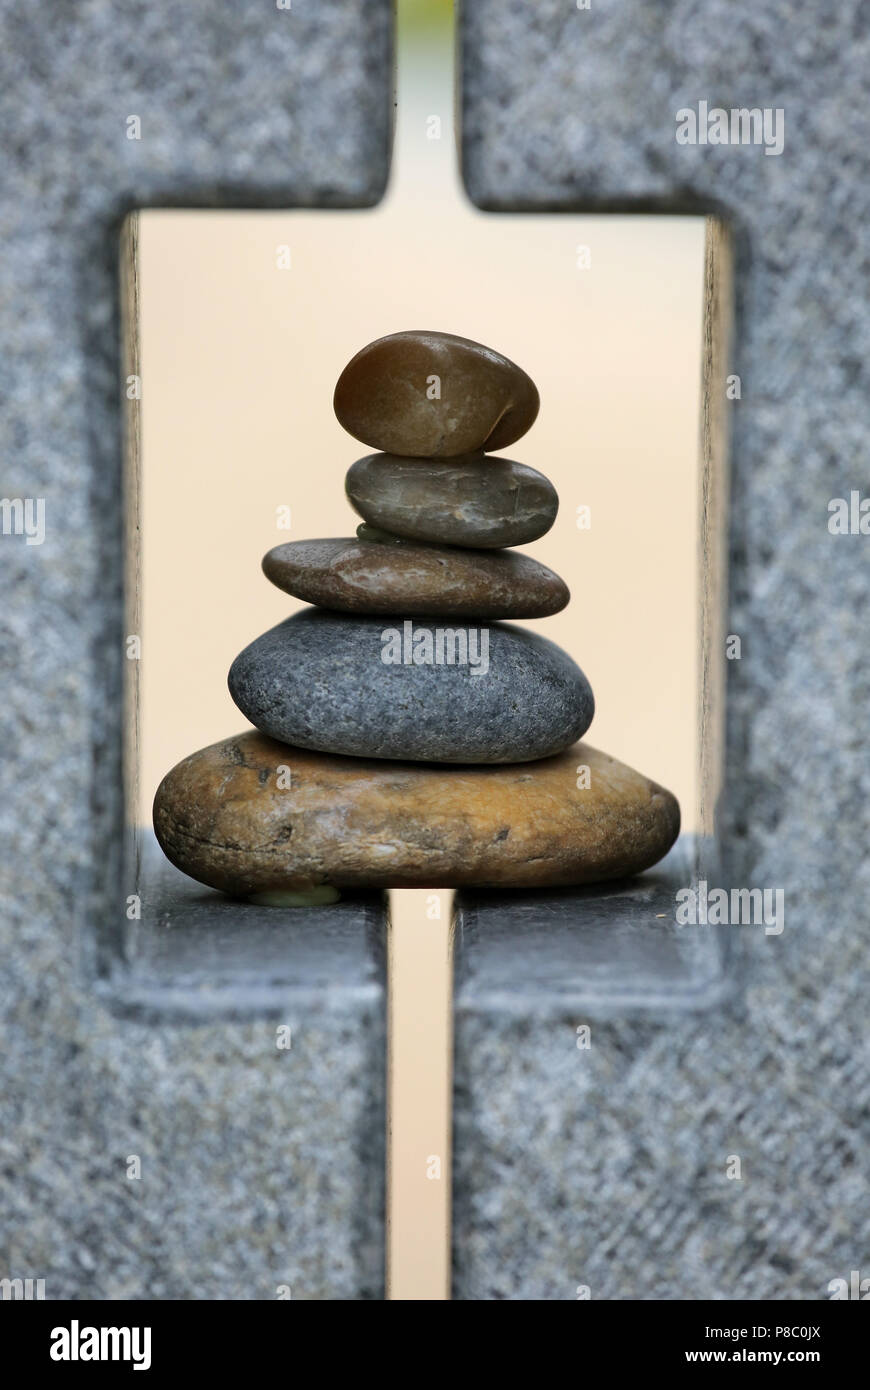 Berlin, Germany, artfully stacked pebbles in a stone frame Stock Photo